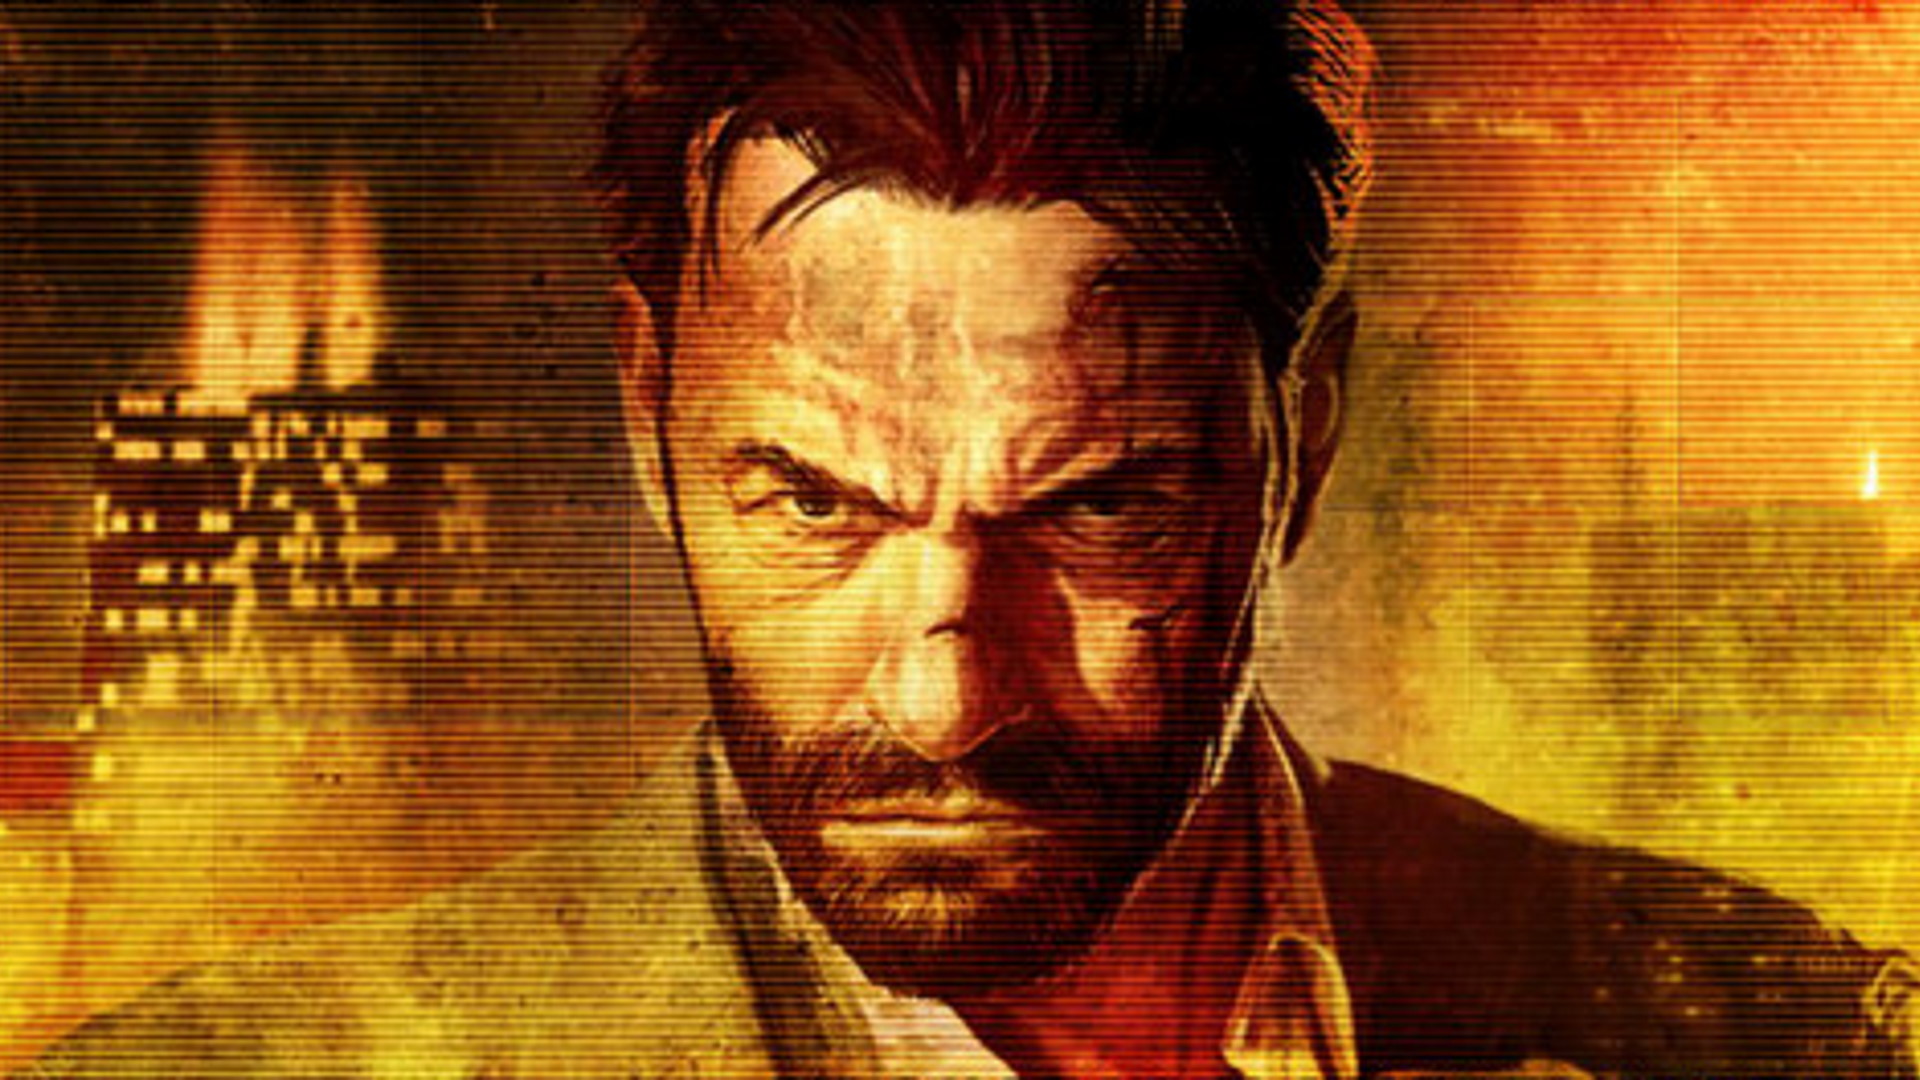 Max Payne 3 Anniversary Edition OST adds previously unreleased tracks